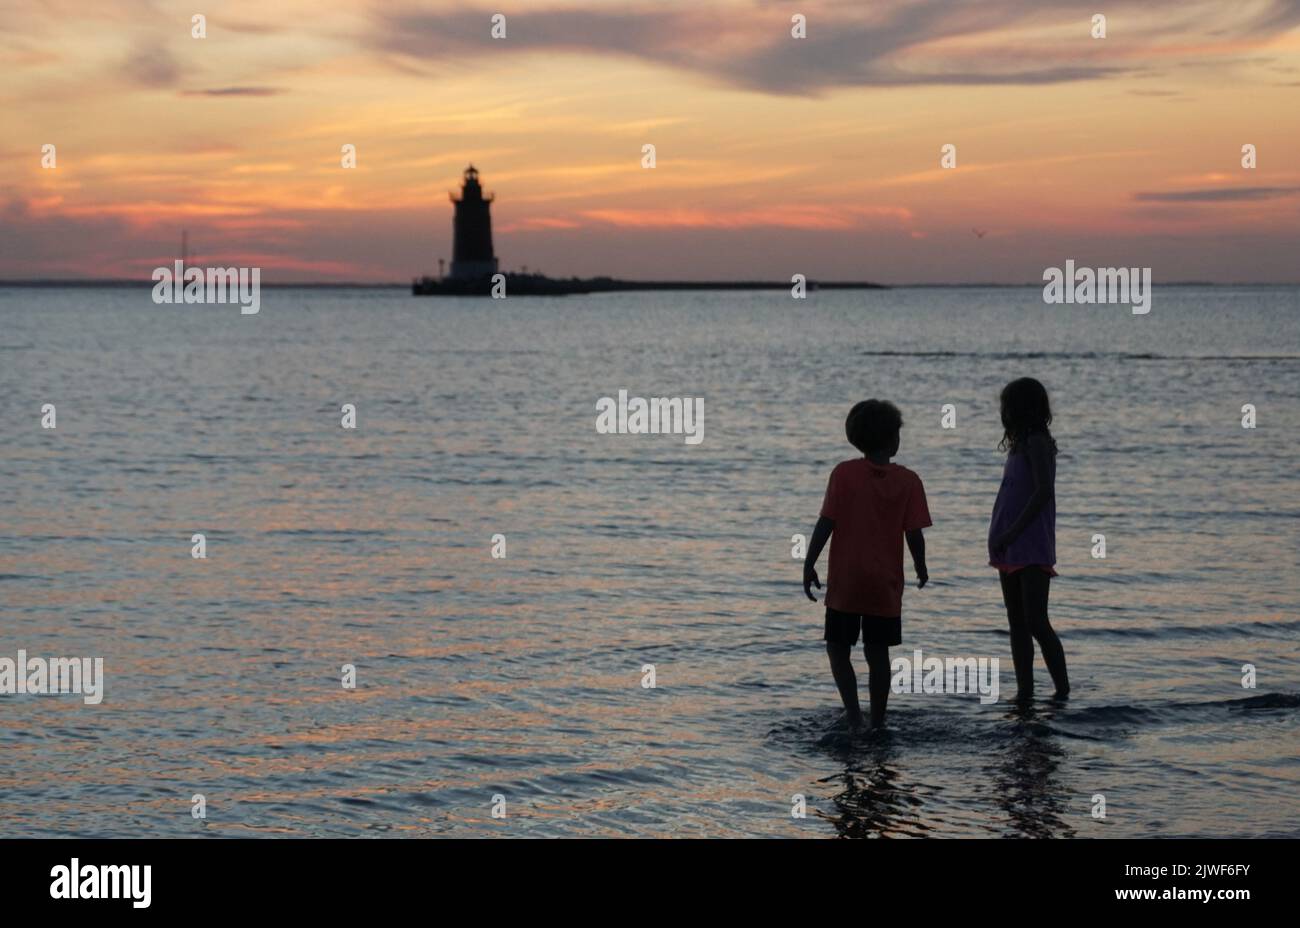 Silhouette of young kids enjoying the sunset at Cape Henlopen State Park, Lewes, Delaware, U.S.A Stock Photo